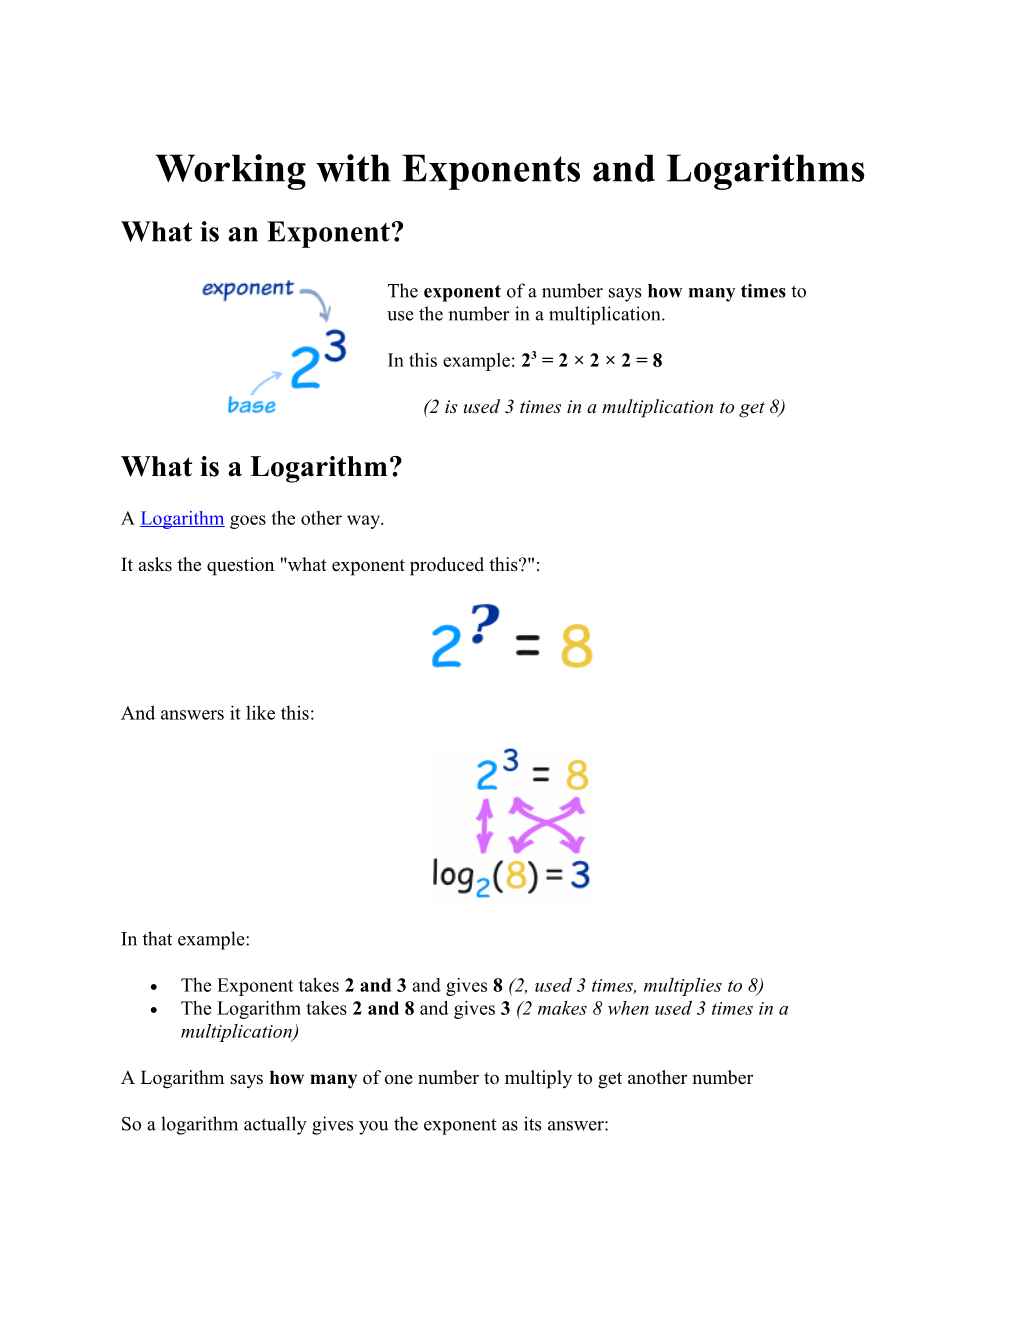 Working with Exponents and Logarithms